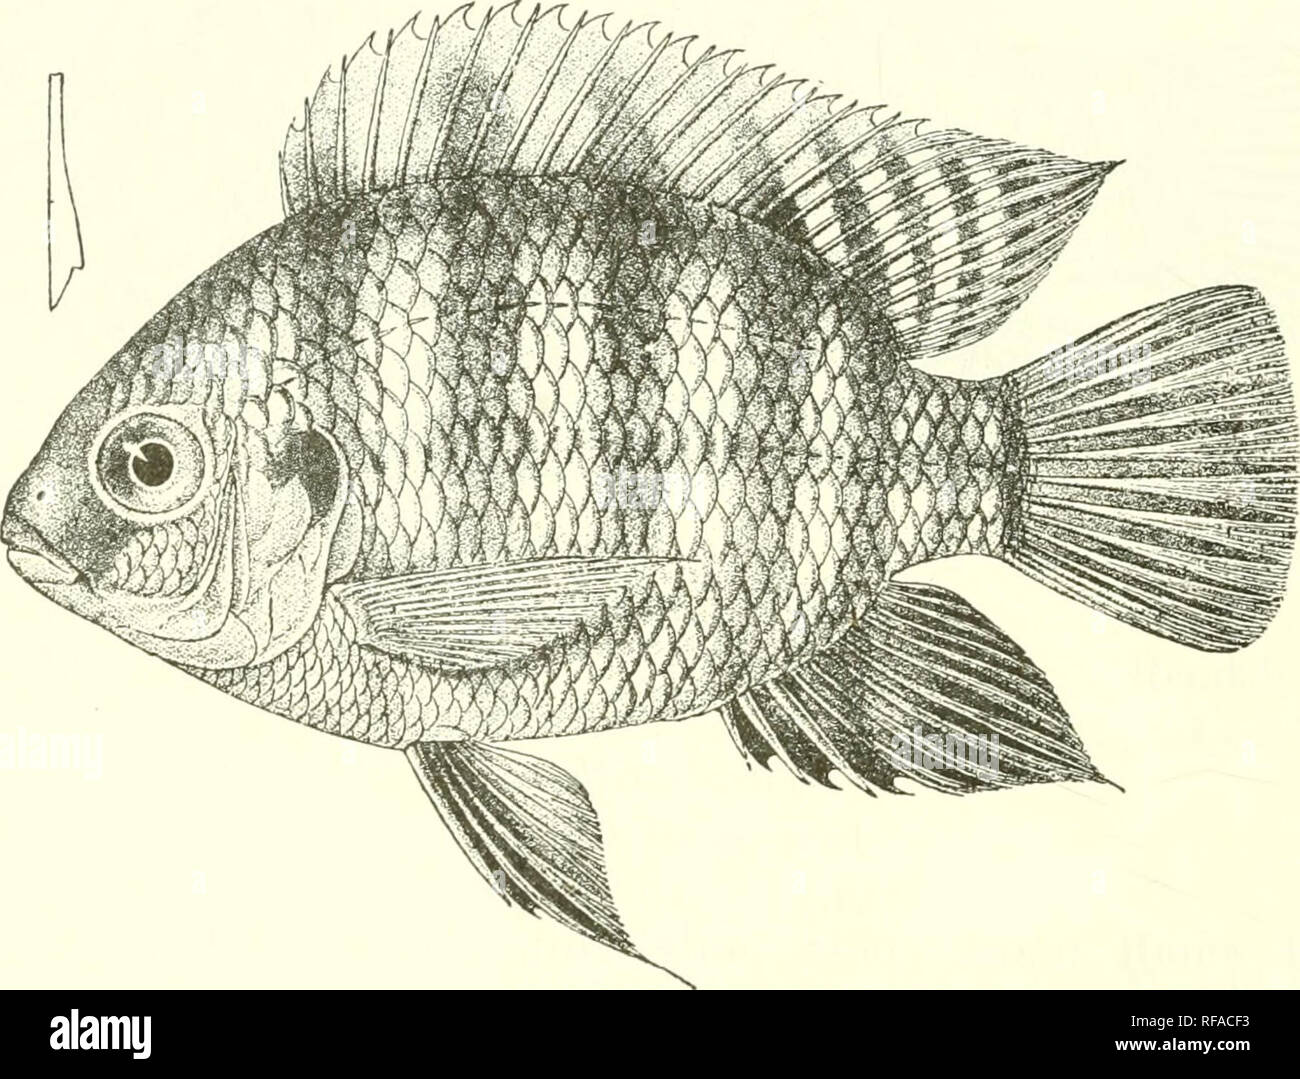 . Catalogue of the fresh-water fishes of Africa in the British Museum (Natural History). Fishes; Freshwater animals. 186 CICHLID.^. G-14. Ad., b&lt;rr. , Cliiloango, Portug. Congo. Dr. W. J. Ansorge (C). 15. Skel. ., ,, „ lG-17. Two of the L. Obeke, Upper Congo. M. P. Dcll.ez (C). types. 25. TILAPIA MART^. Boulcng. Proc. Zool. Soc. 1899, p. 122, pi. xi. fig. 1 ; Pell.'gr. Mem. Soc. Zool. France, xvi. 1901, p. 323. Depth of body If to 'if times in total length, length of head 2f to 3 times. Head If to 2 times as long as broad, witb convex upper profile; snout rounded, about 1^ times as long as  Stock Photo